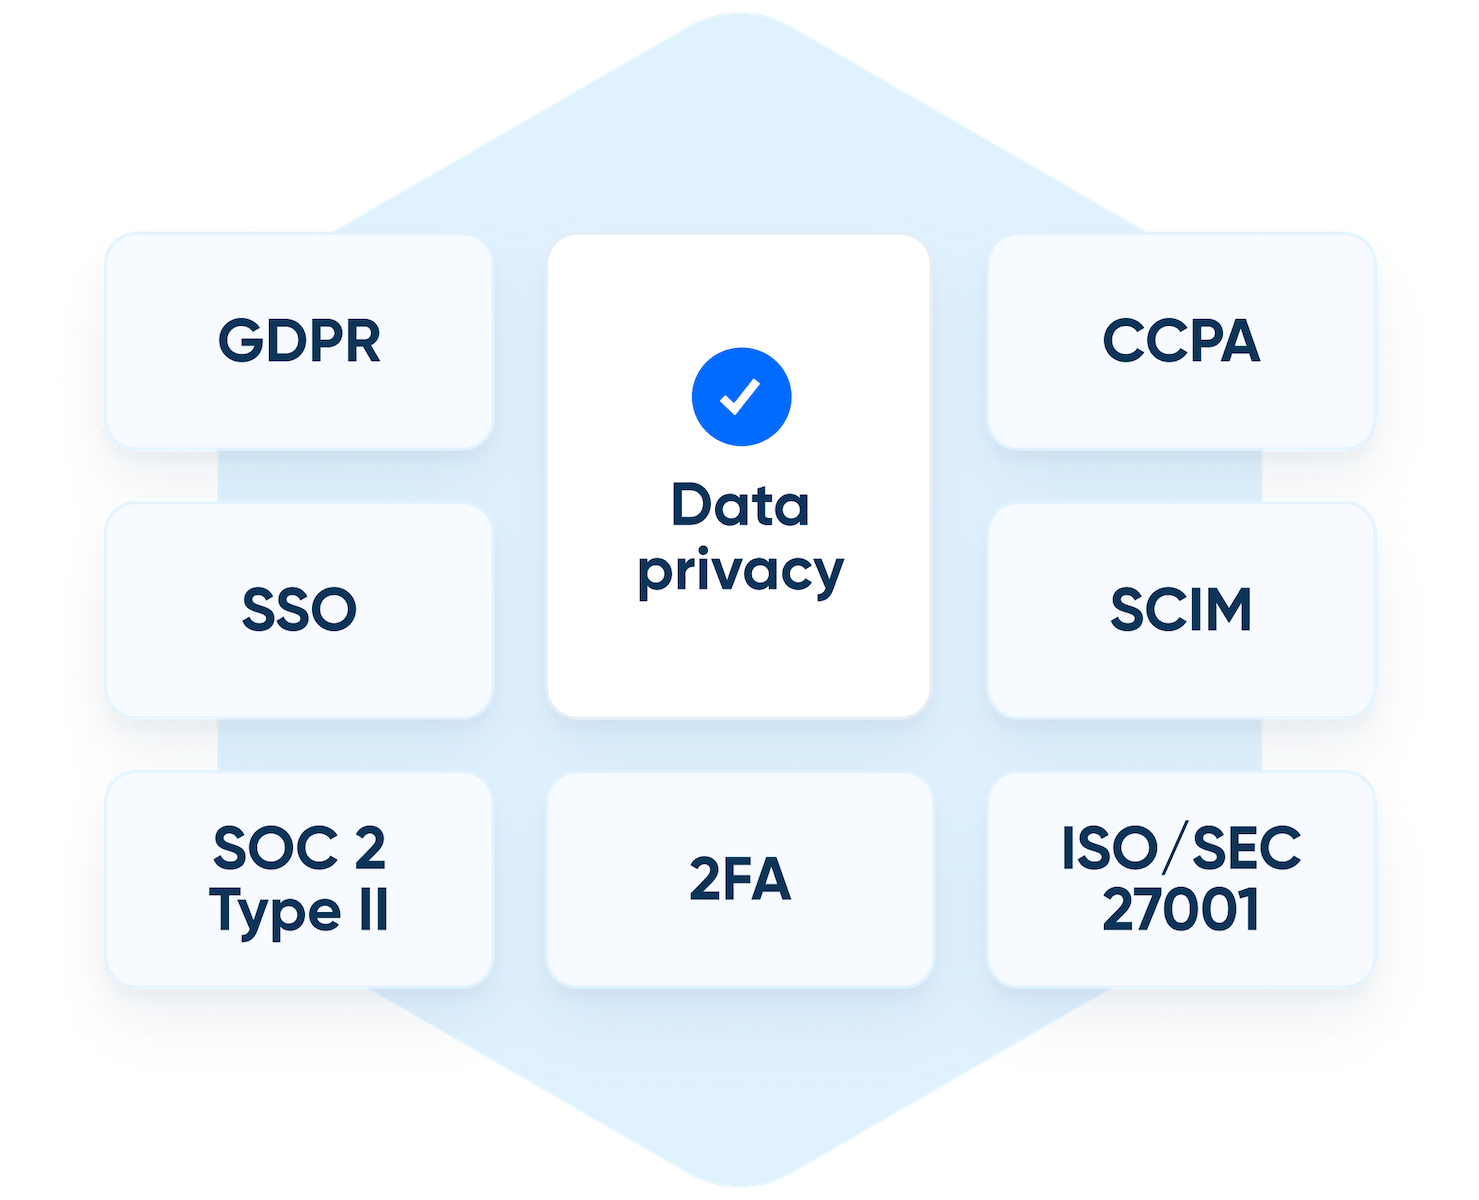 Graphic showing Calendly adheres to SEC regulations and meets the compliance needs of the world’s largest financial service companies, including FINRA, ISO/IEC 27001, SOC 2 Type 2, PCI, and GDPR.